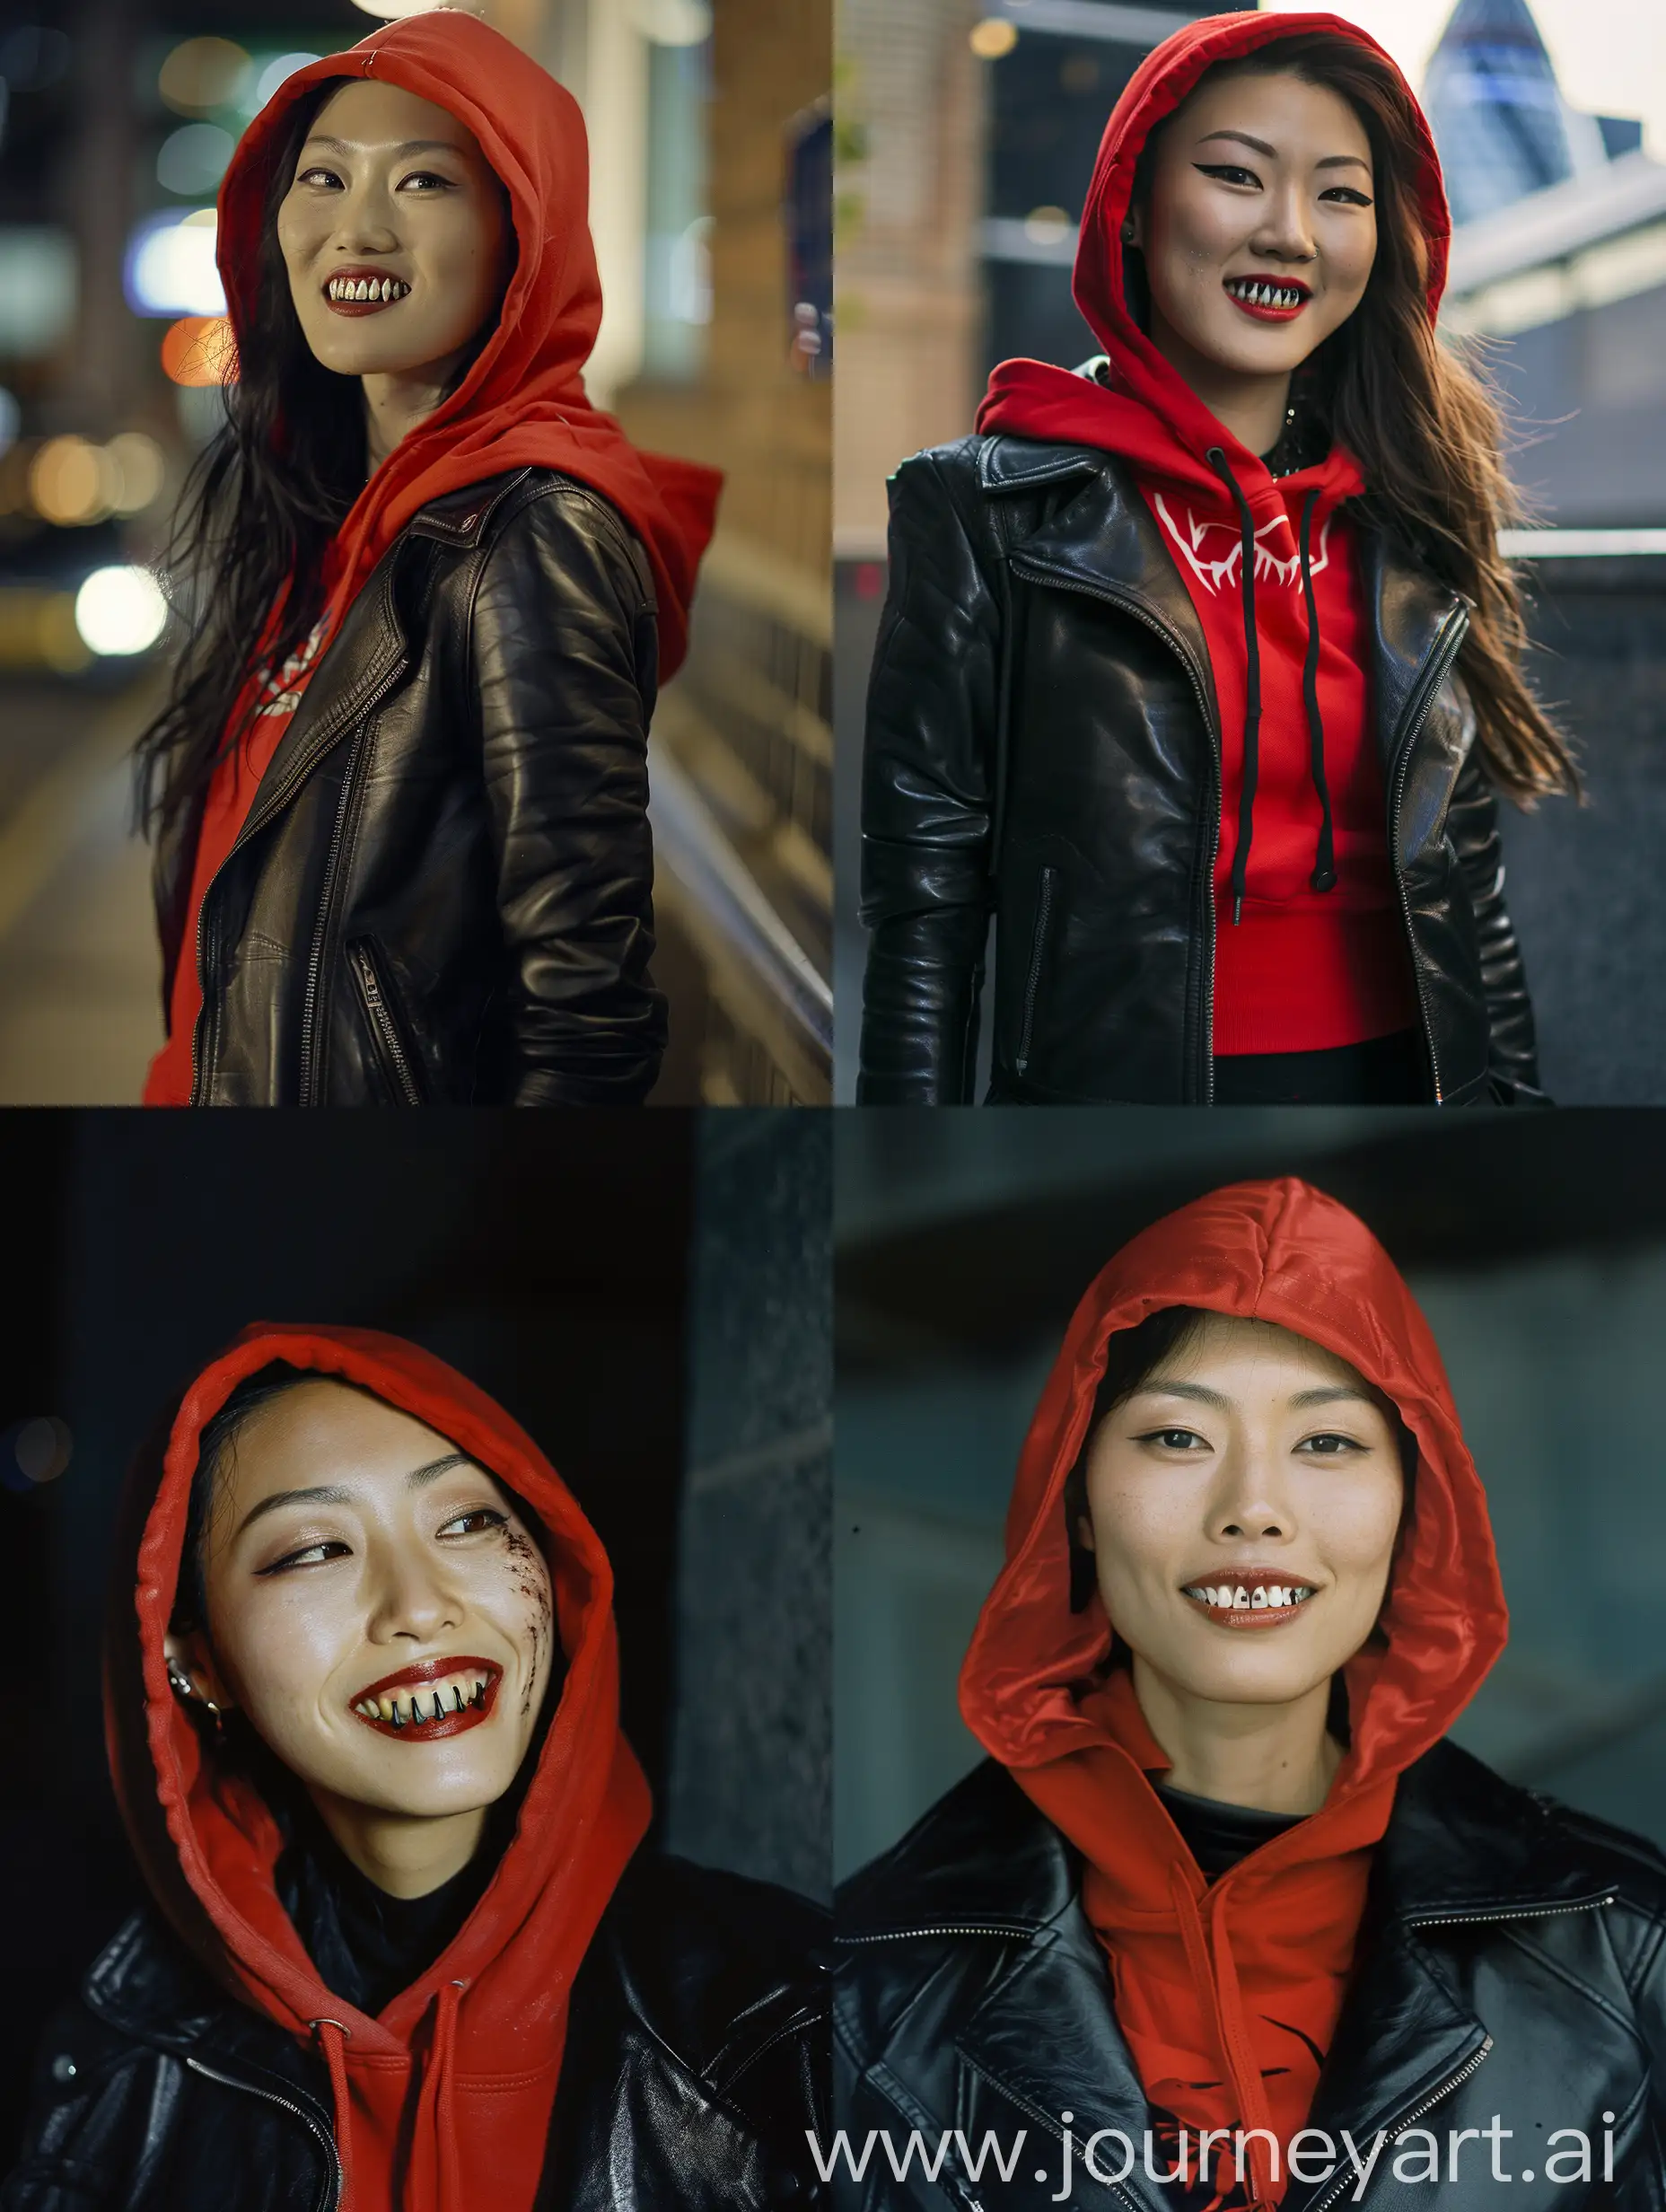 Cinematic, documentary photo, vampire woman and night london background, korean british mixed, intense confidence and determination, intimidating. She has elegant black leather attire and a red hoodie. smiles fangs. directed by Ridley Scott, shot with Arriflex 35BL Camera. Canon K35 Prime Lenses, 70 mm -- style raw